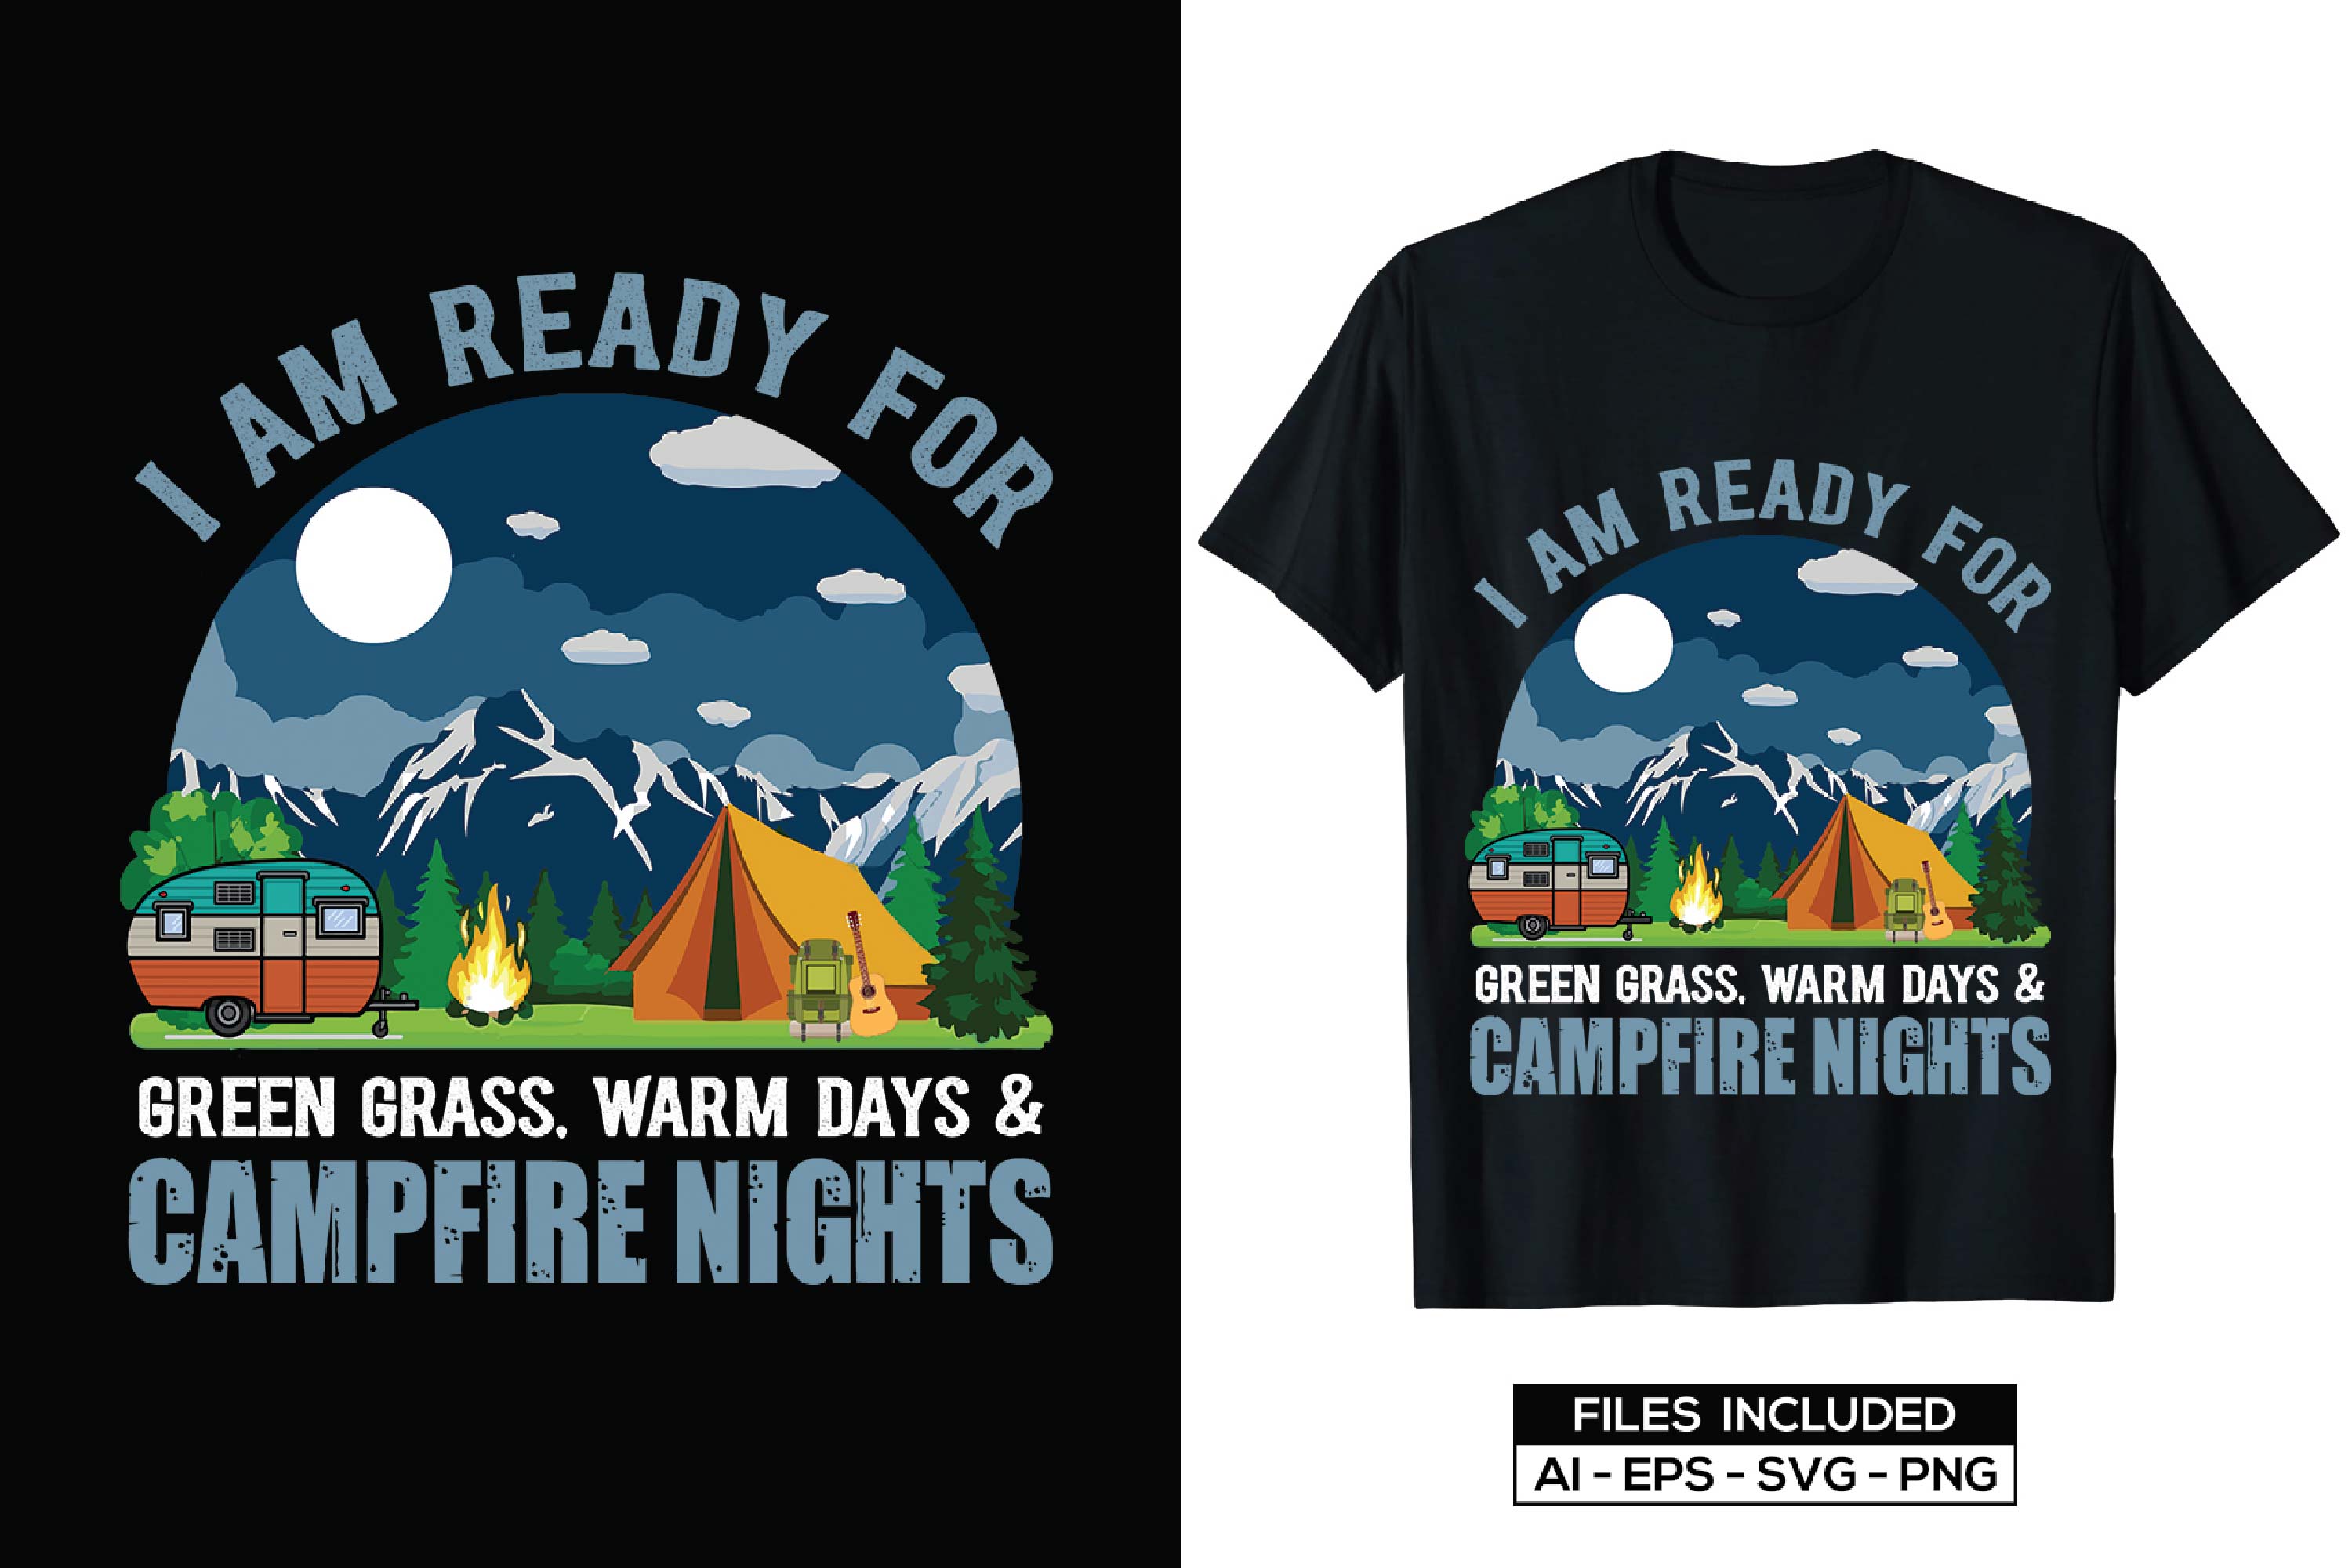 Image of a black T-shirt with a wonderful print on the theme of camping.